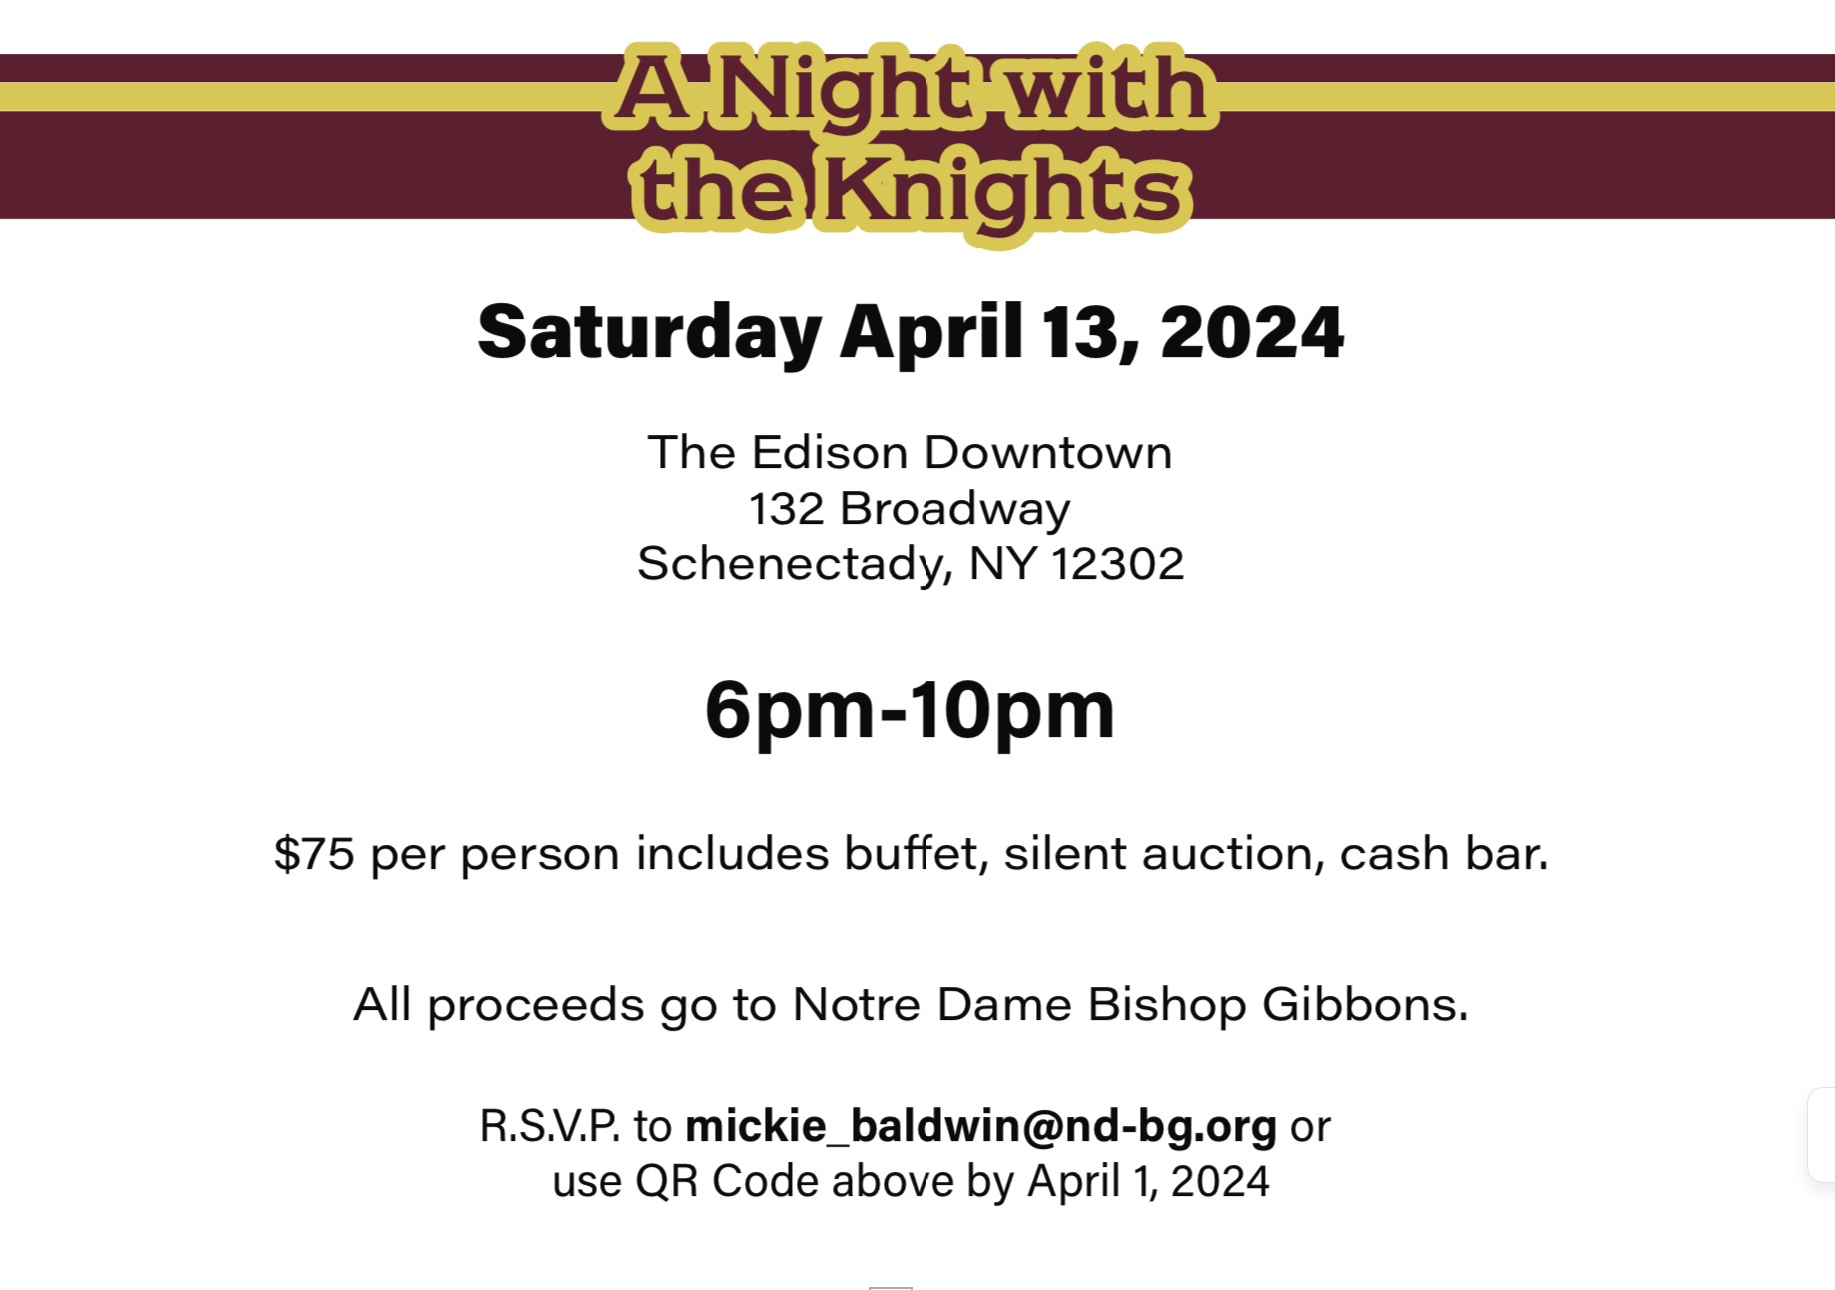 Make Plans to Join us at the NDBG Auction